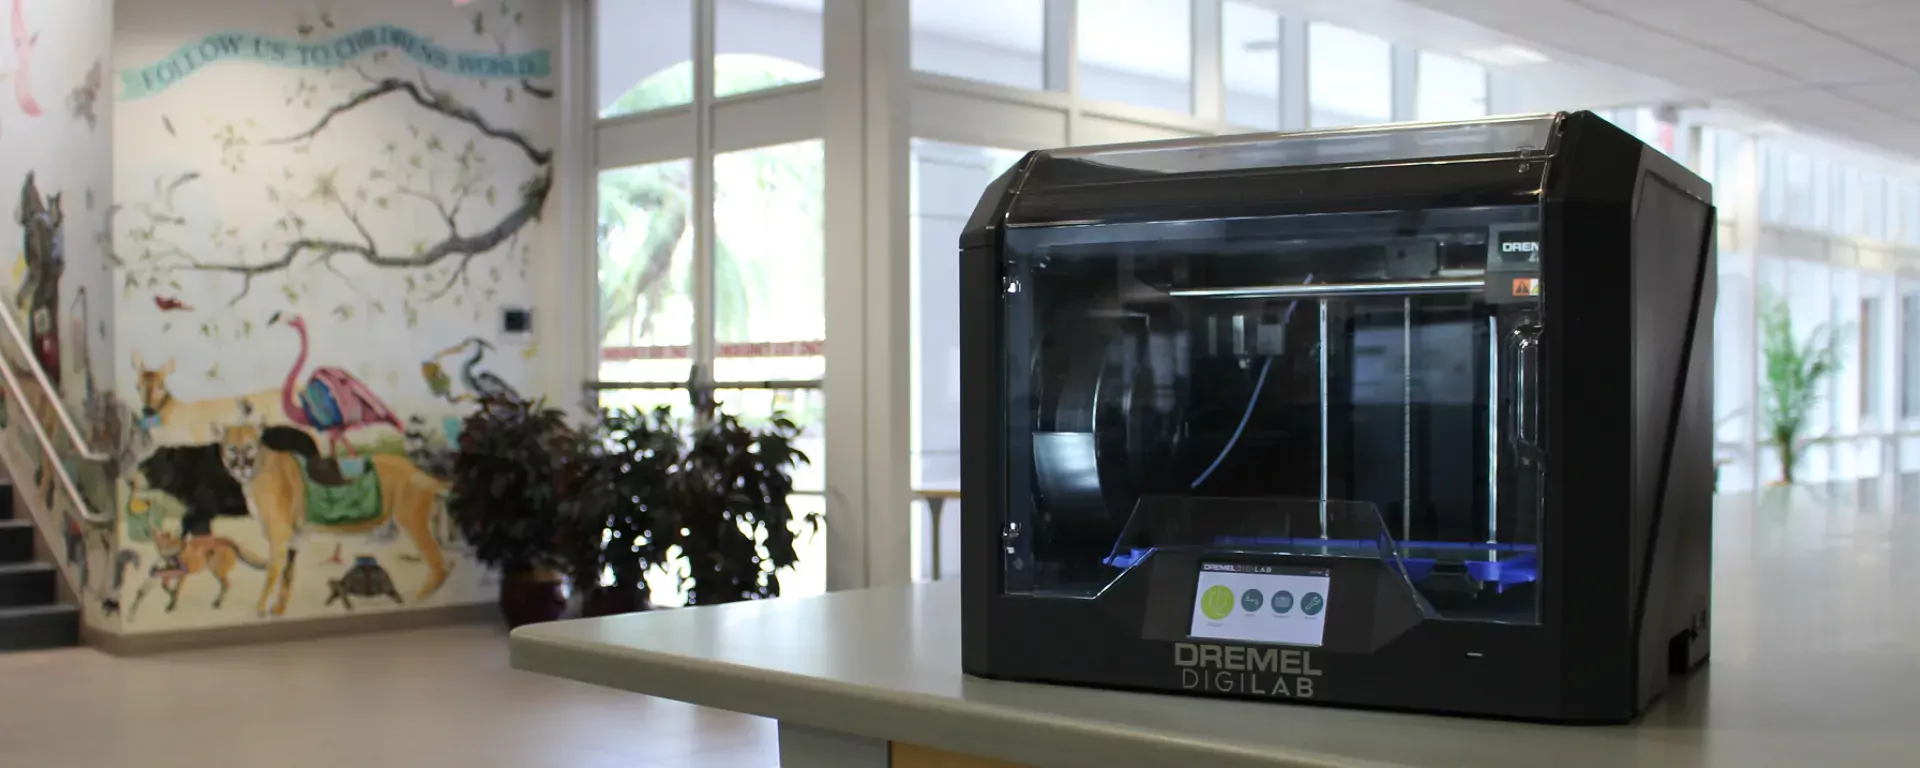 photo of 3D printer in library lobby